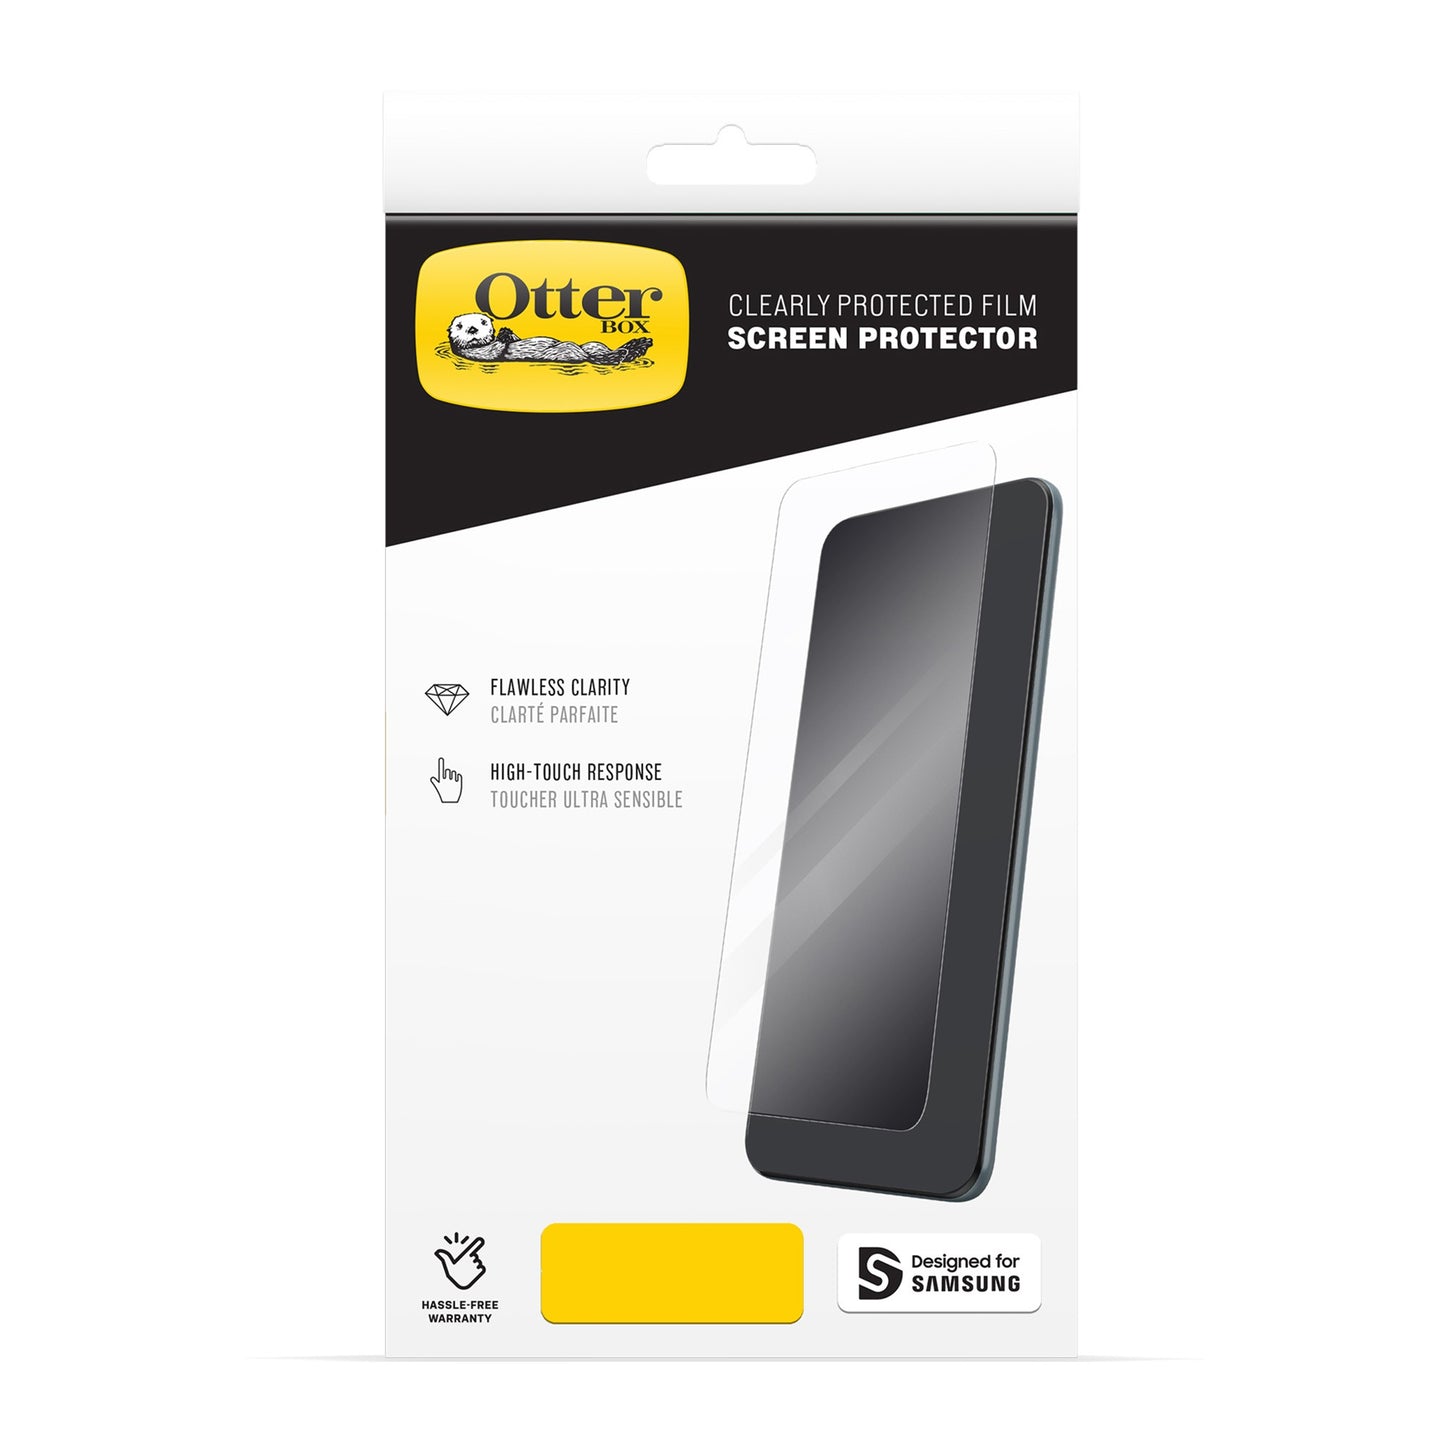 Samsung Galaxy S22 5G Otterbox Clearly Protected Film screen protector - 15-09557